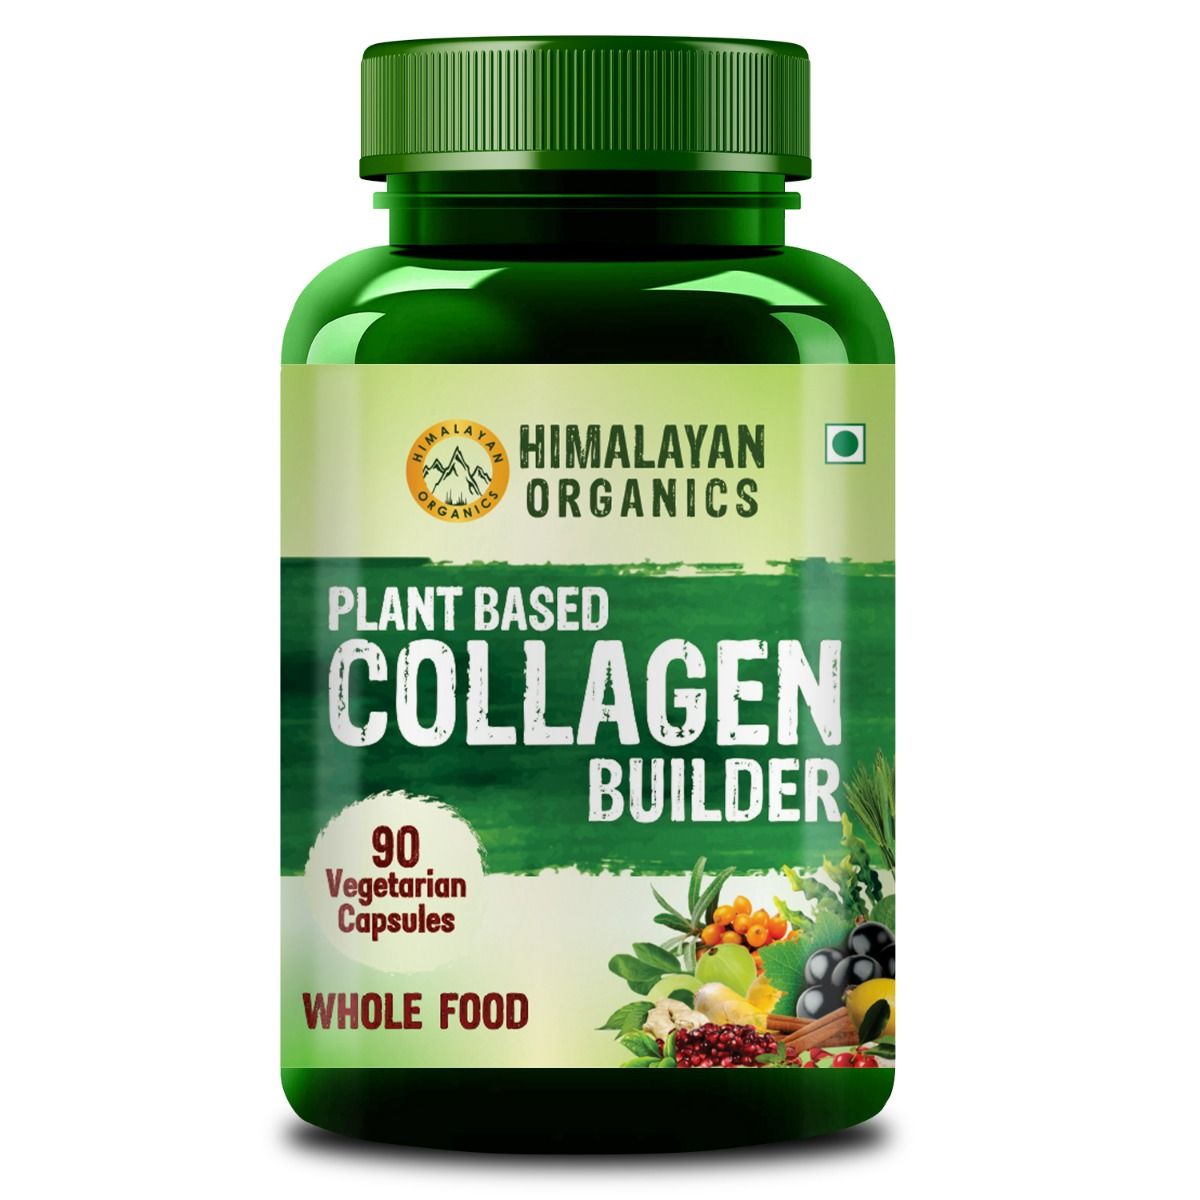 Himalayan Organics Plant Based Collagen Builder, 90 Capsules, Pack of 1 